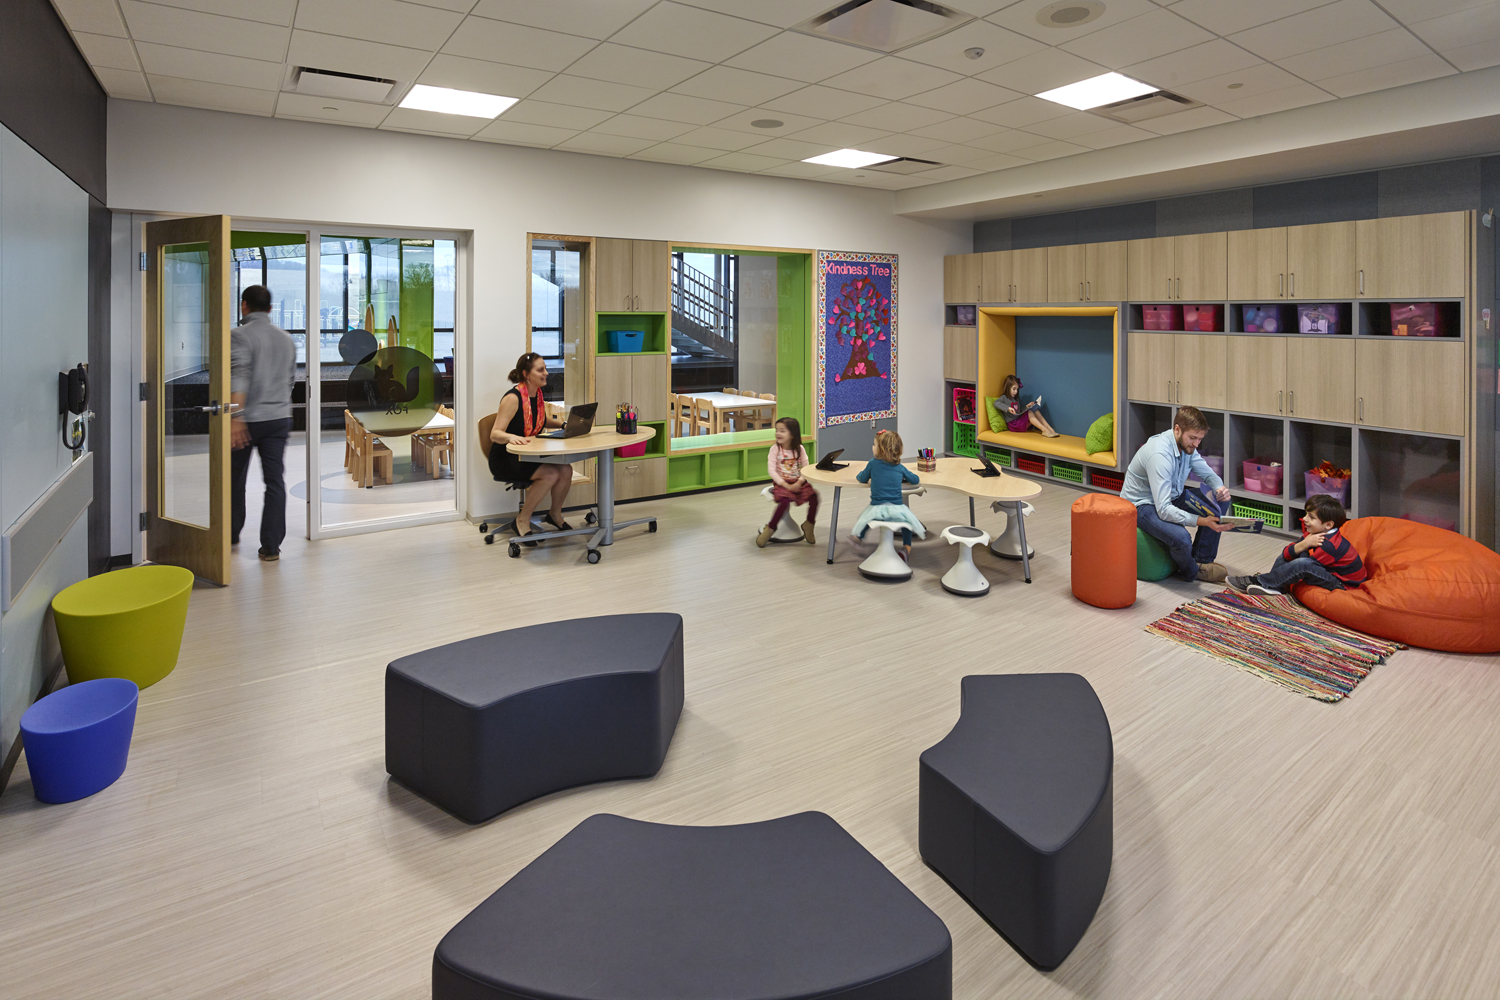 Designing Early Learning Environments with Evidence-Based Research